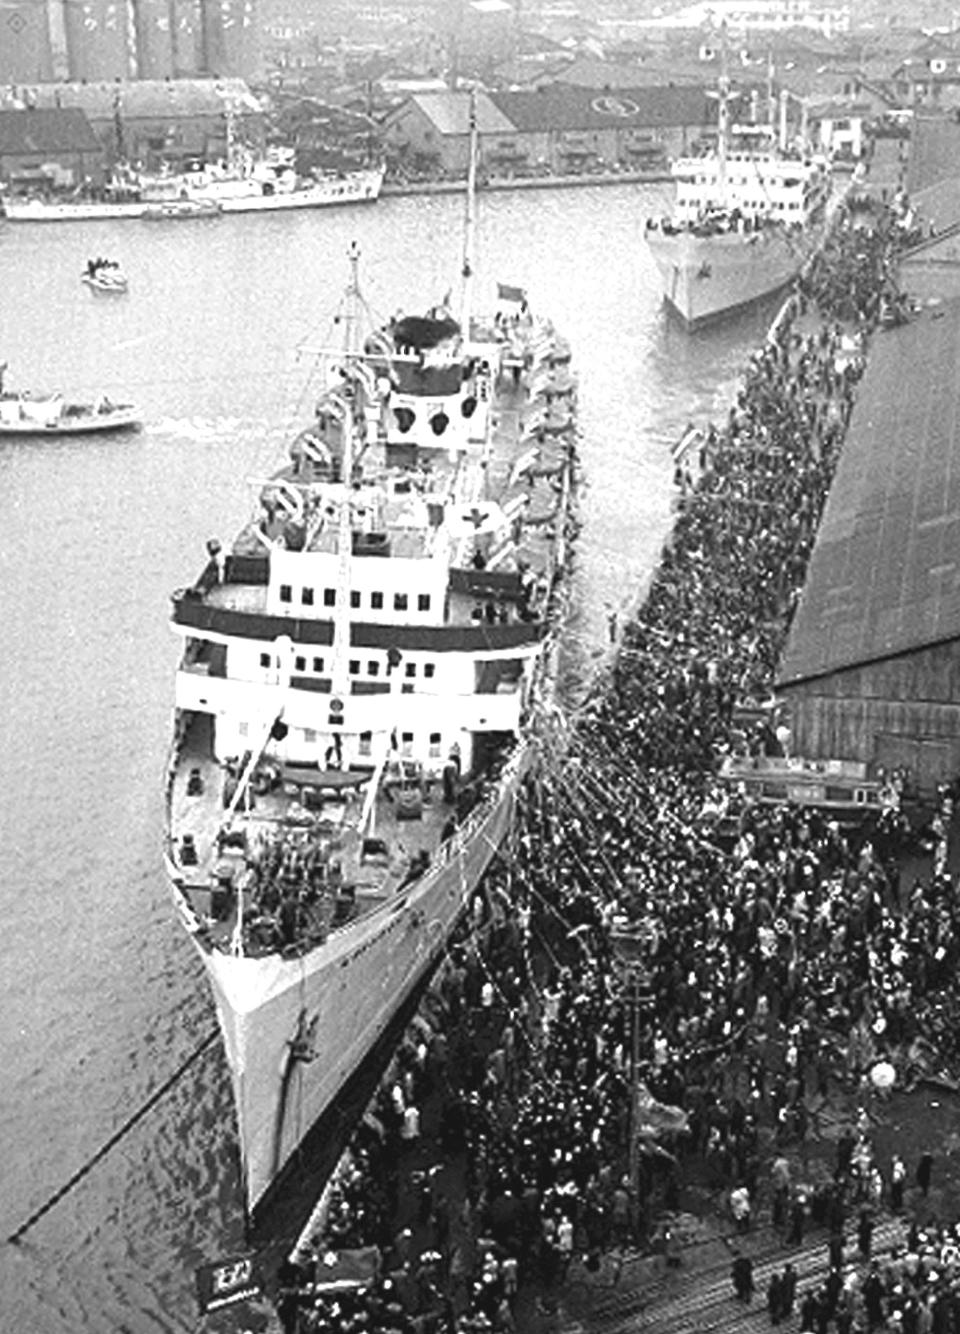 In this Dec. 14, 1959, photo, the first two ships carrying 975 people depart for North Korea from the port of Niigata, Japan, after receiving a grand see-off. A Japanese court has summoned North Korea's leader to face demands for compensation by several ethnic Korean residents of Japan who say they suffered human rights abuses in North Korea after joining a resettlement program there that described the country as a “paradise on Earth,” a lawyer and plaintiff said Tuesday. (Kyodo News via AP)